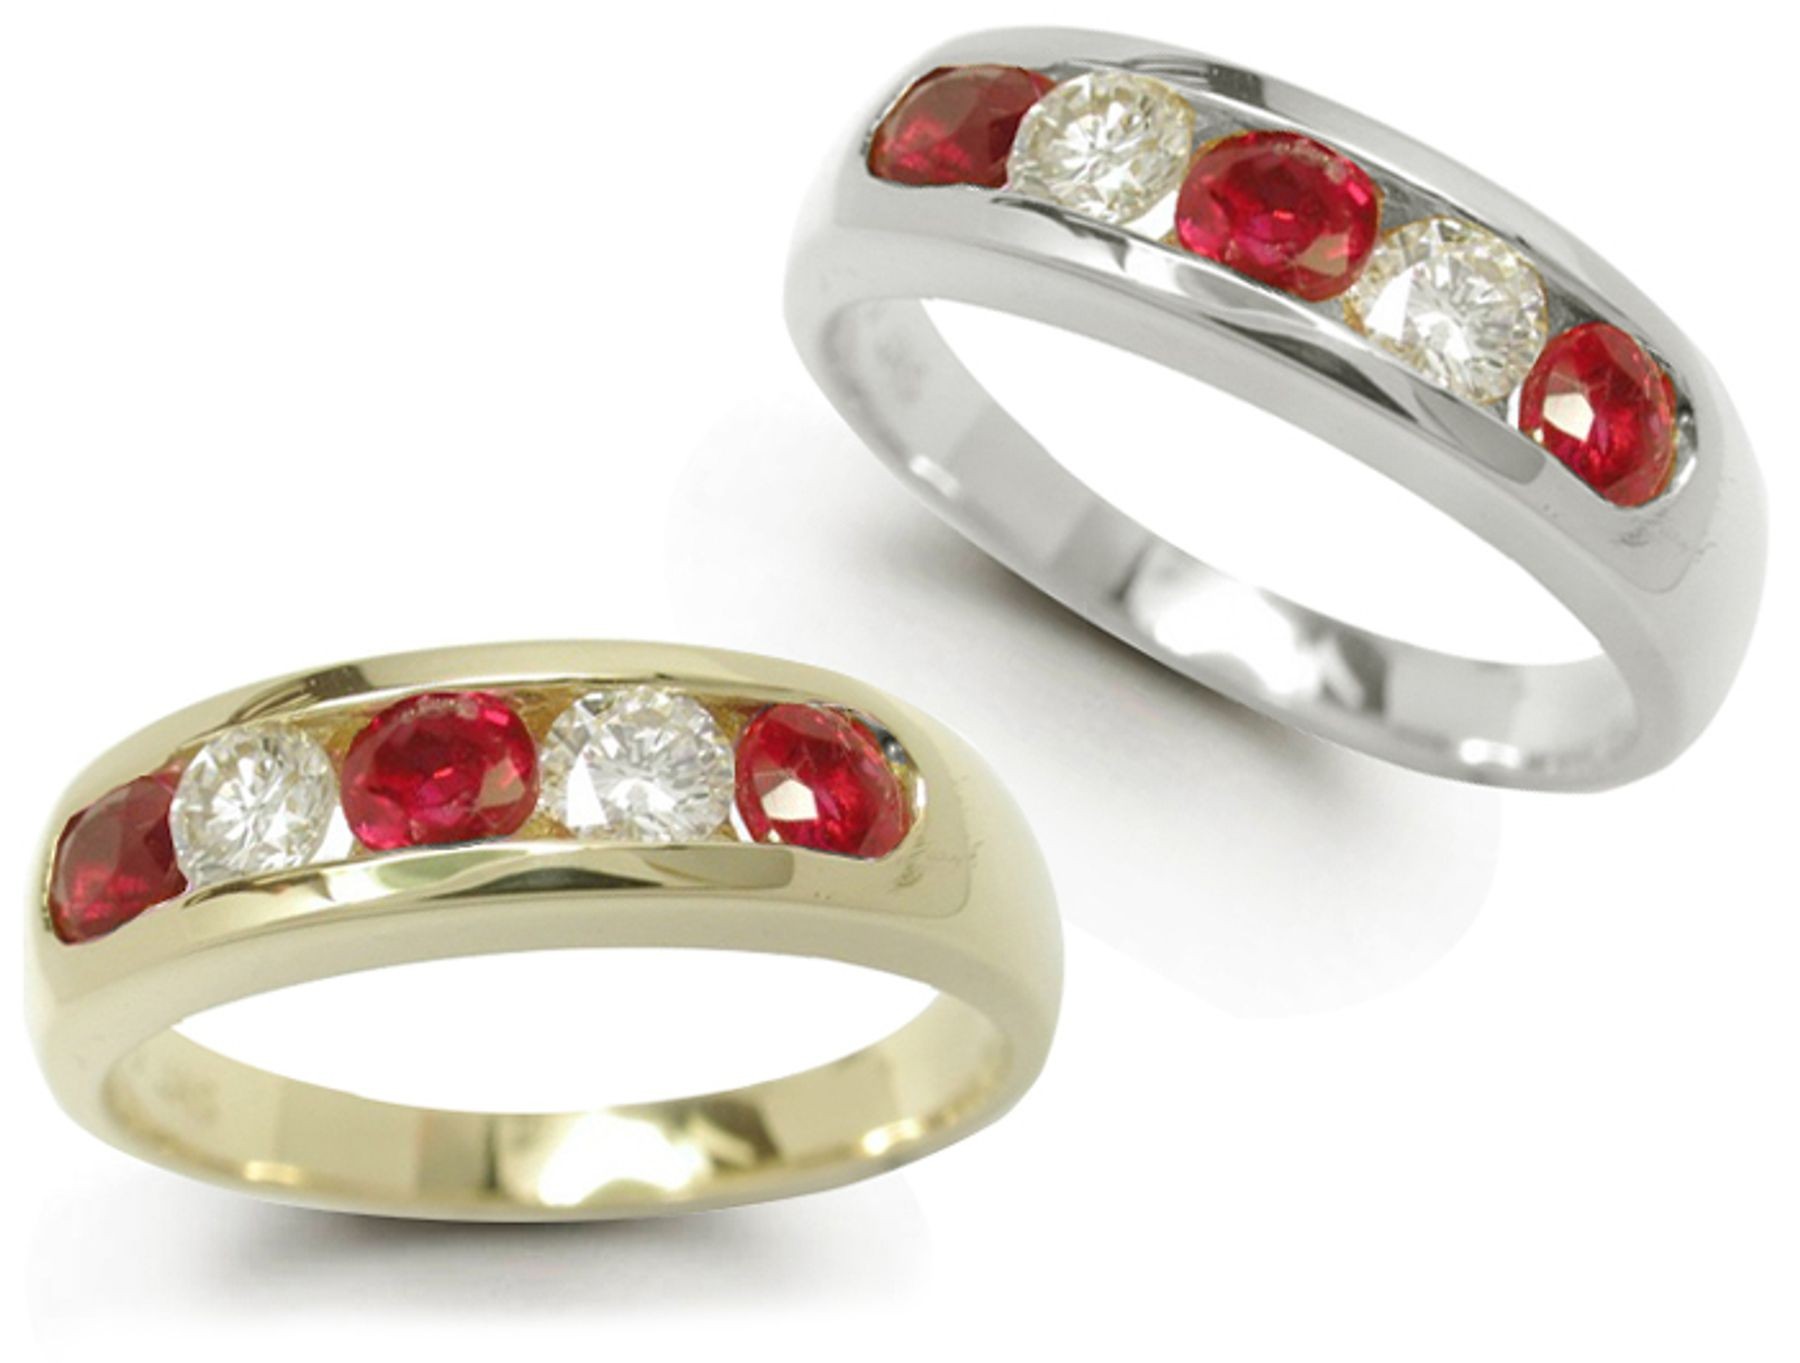 Five Stone Ruby Ring: Ruby diamond ring in platinum set with three round rubies and two round diamonds.